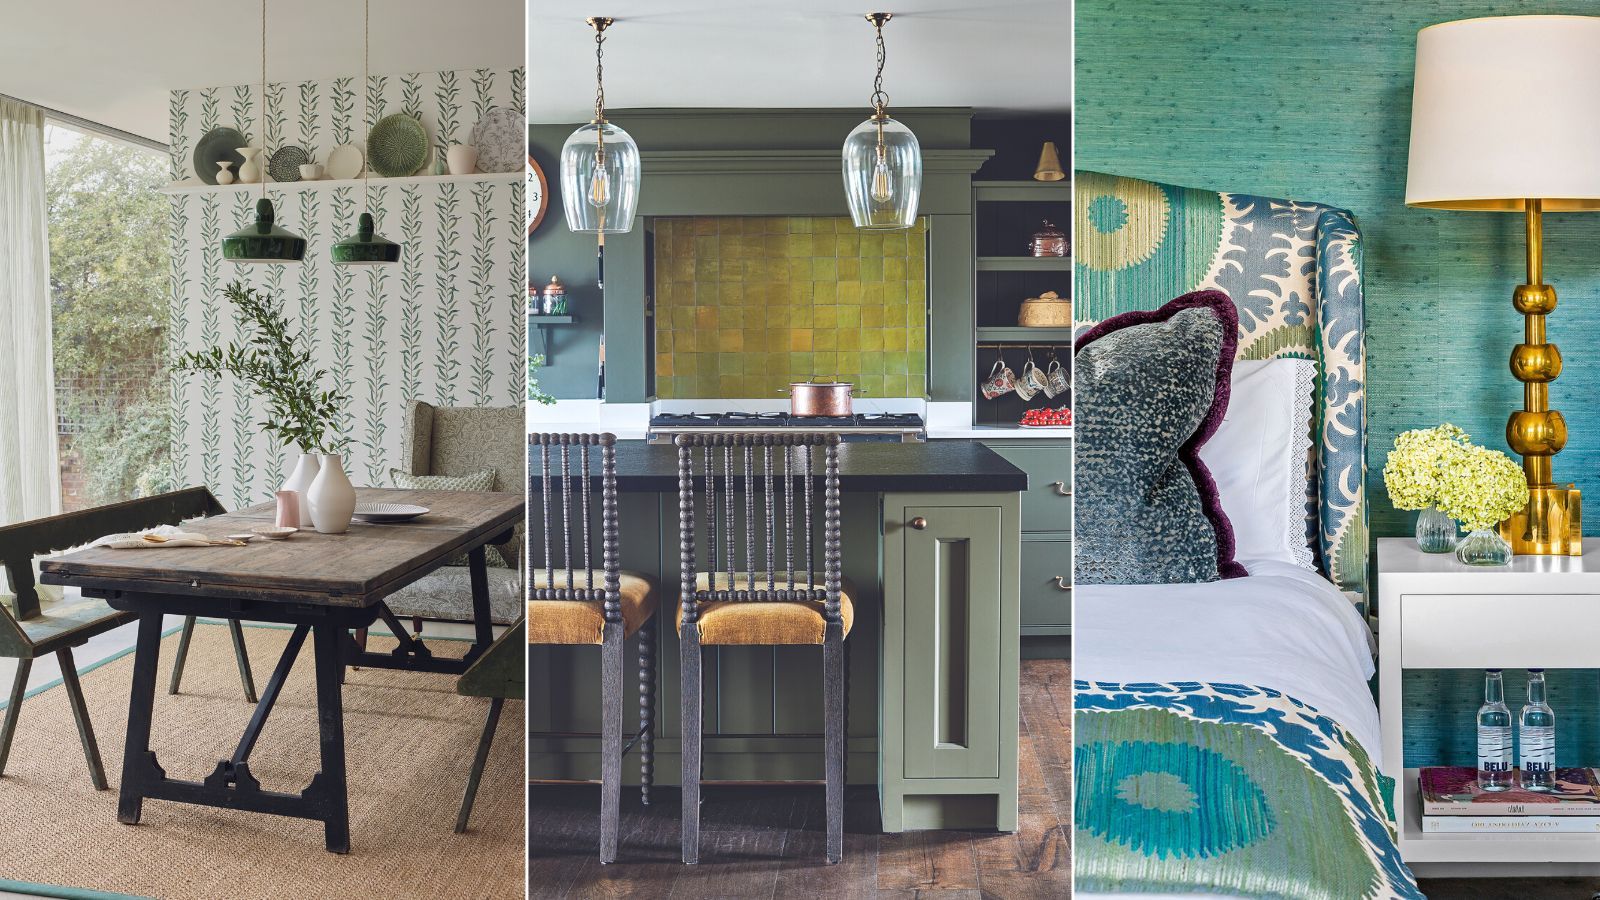 Green room ideas: 15 pretty ways to use green in your rooms